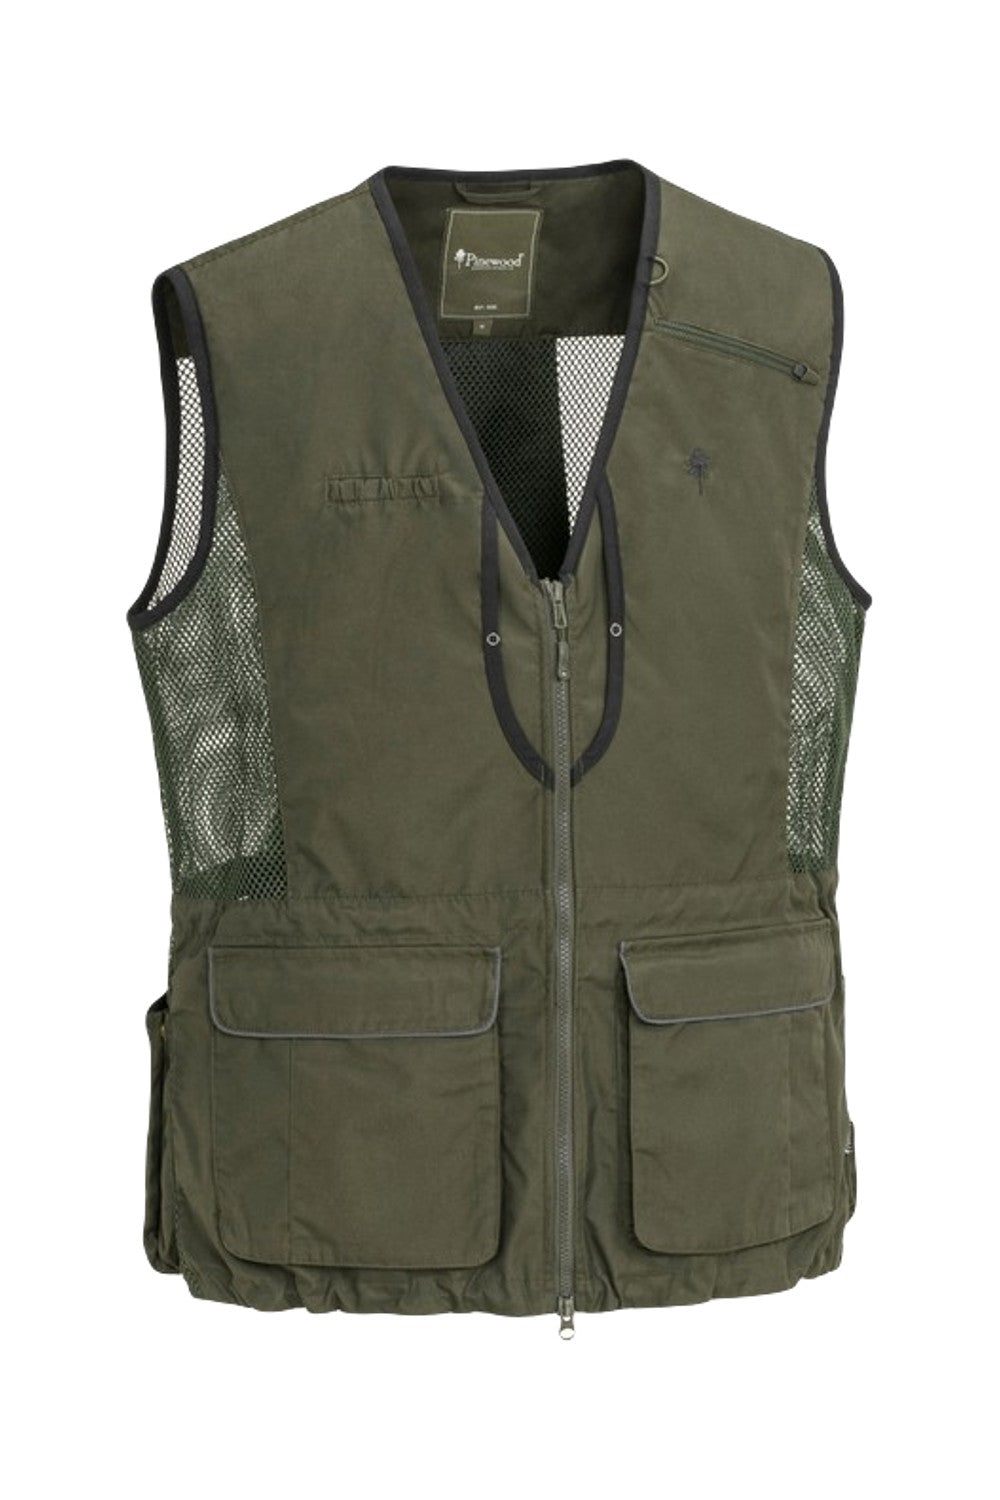 Pinewood Mens Dog Sports 2.0 Vest in Moss Green 